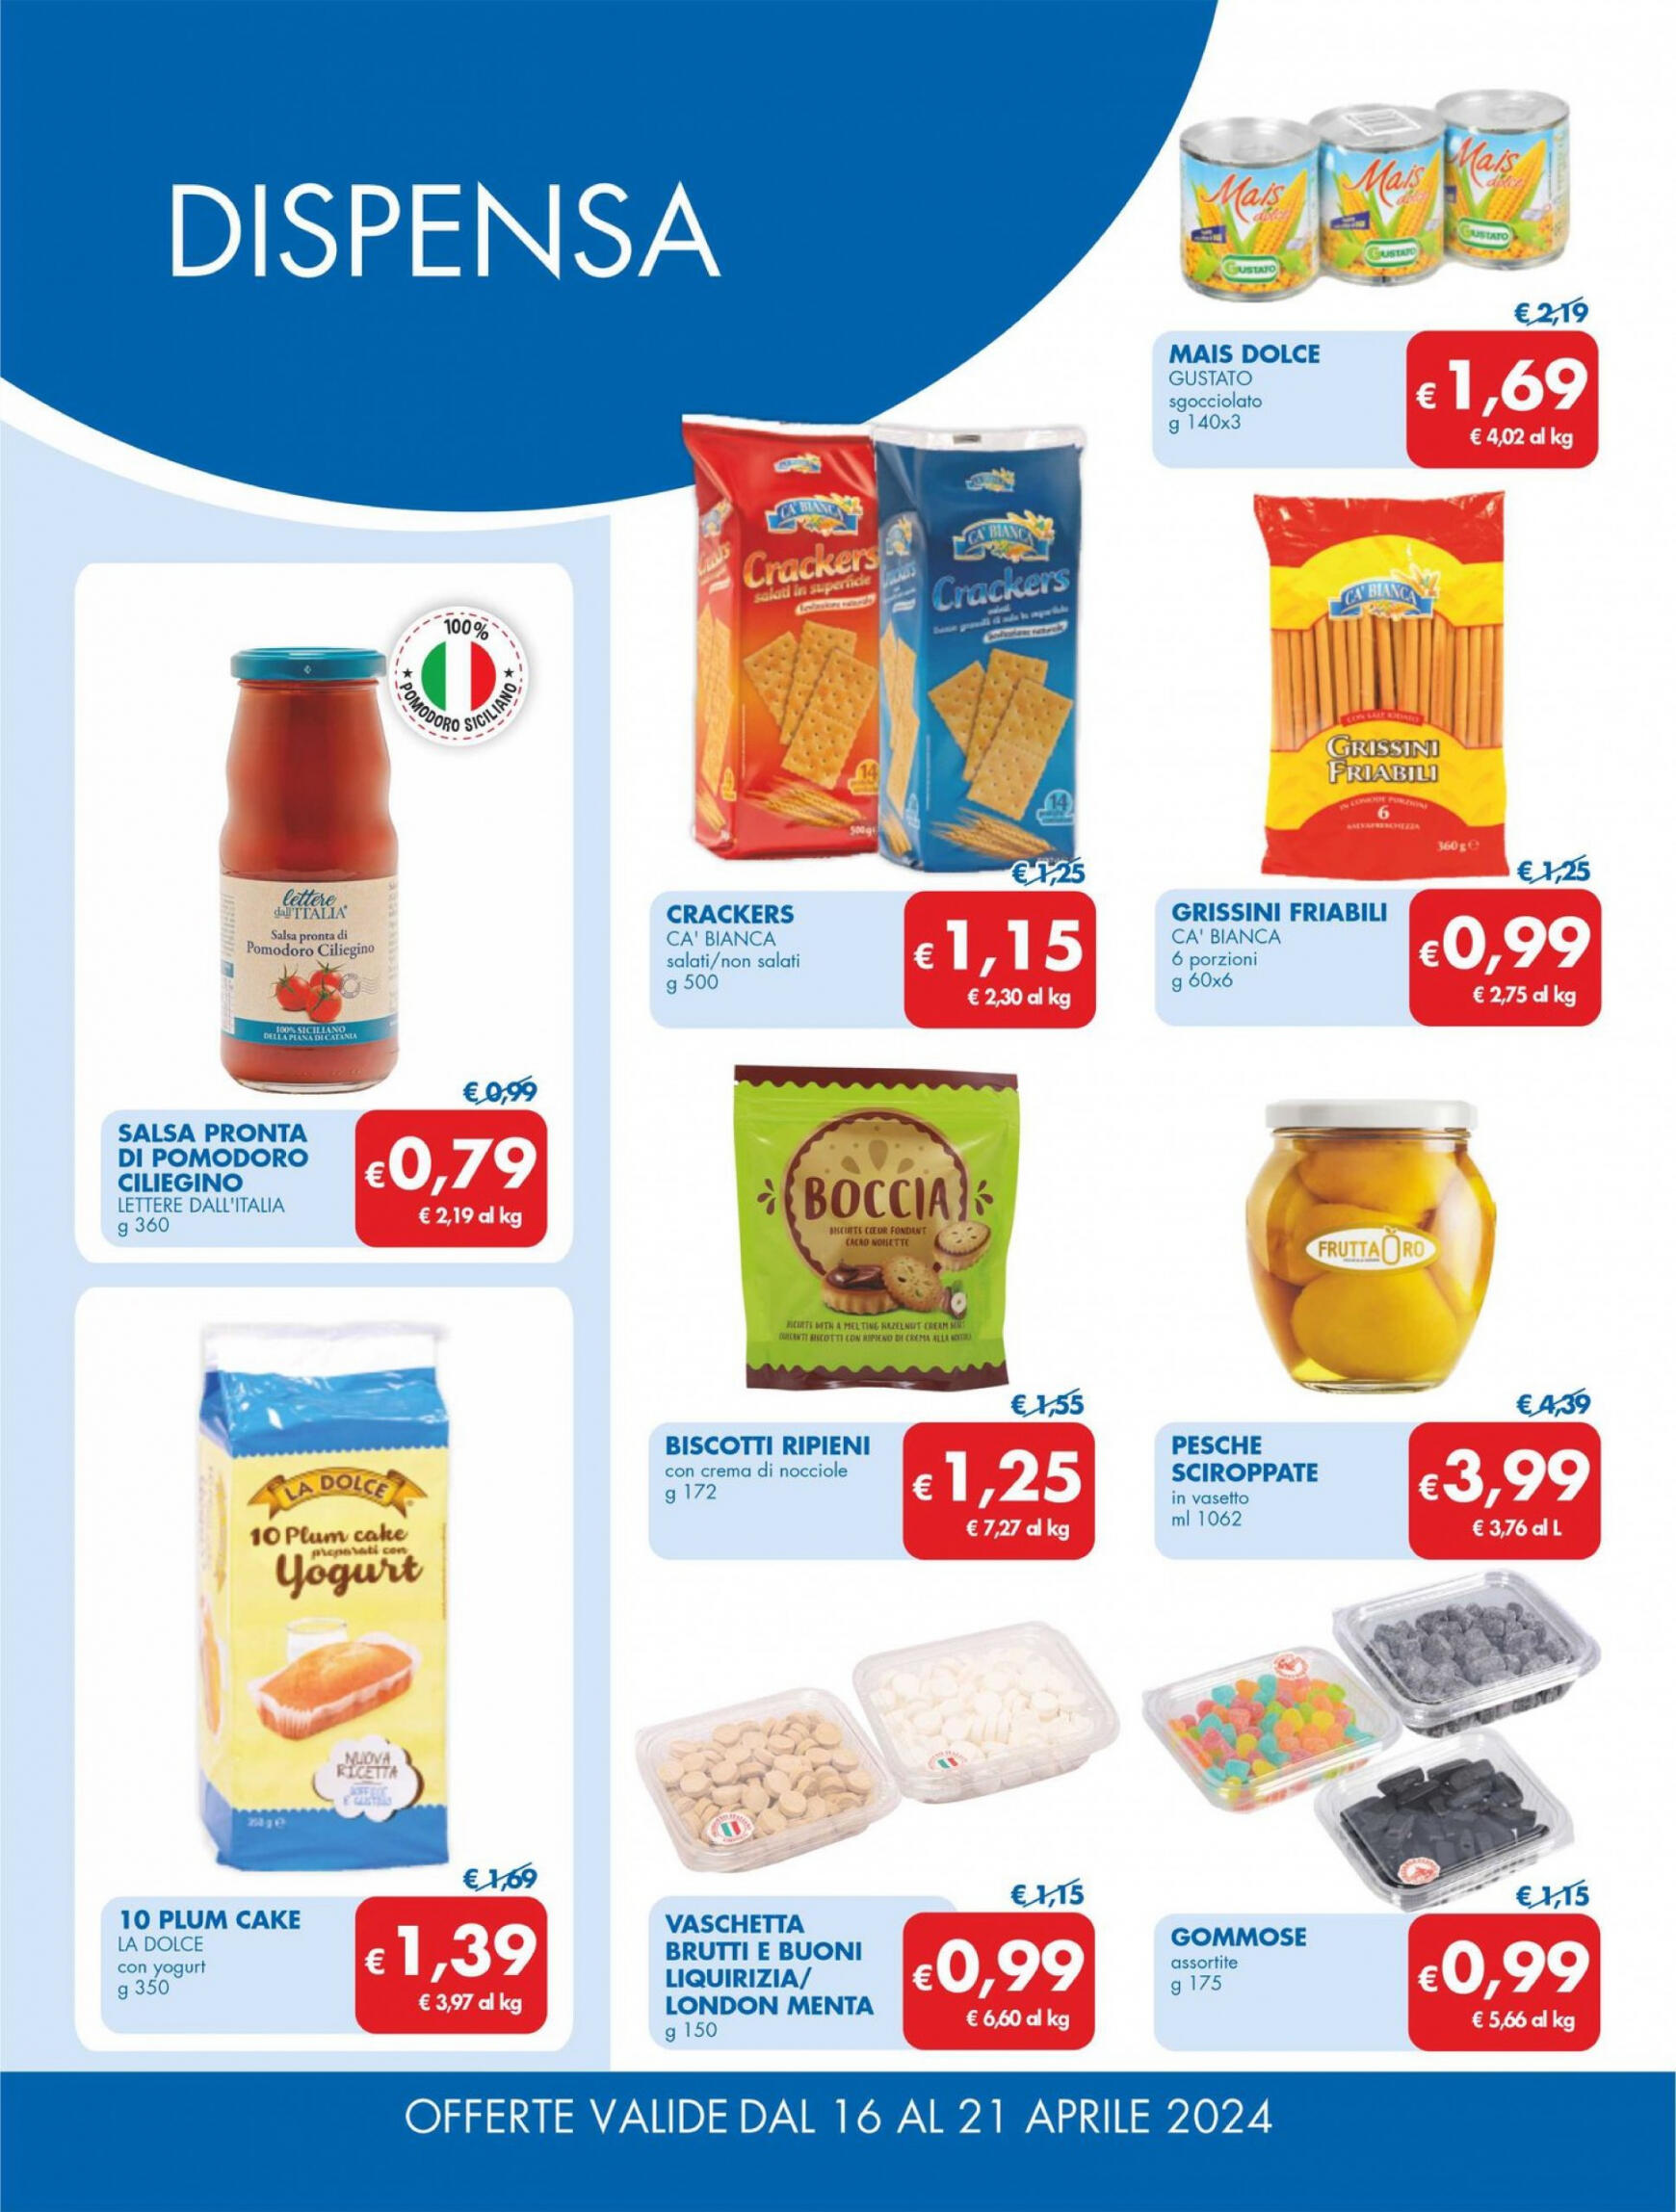 md-discount - Nuovo volantino MD 16.04. - 21.04. - page: 14